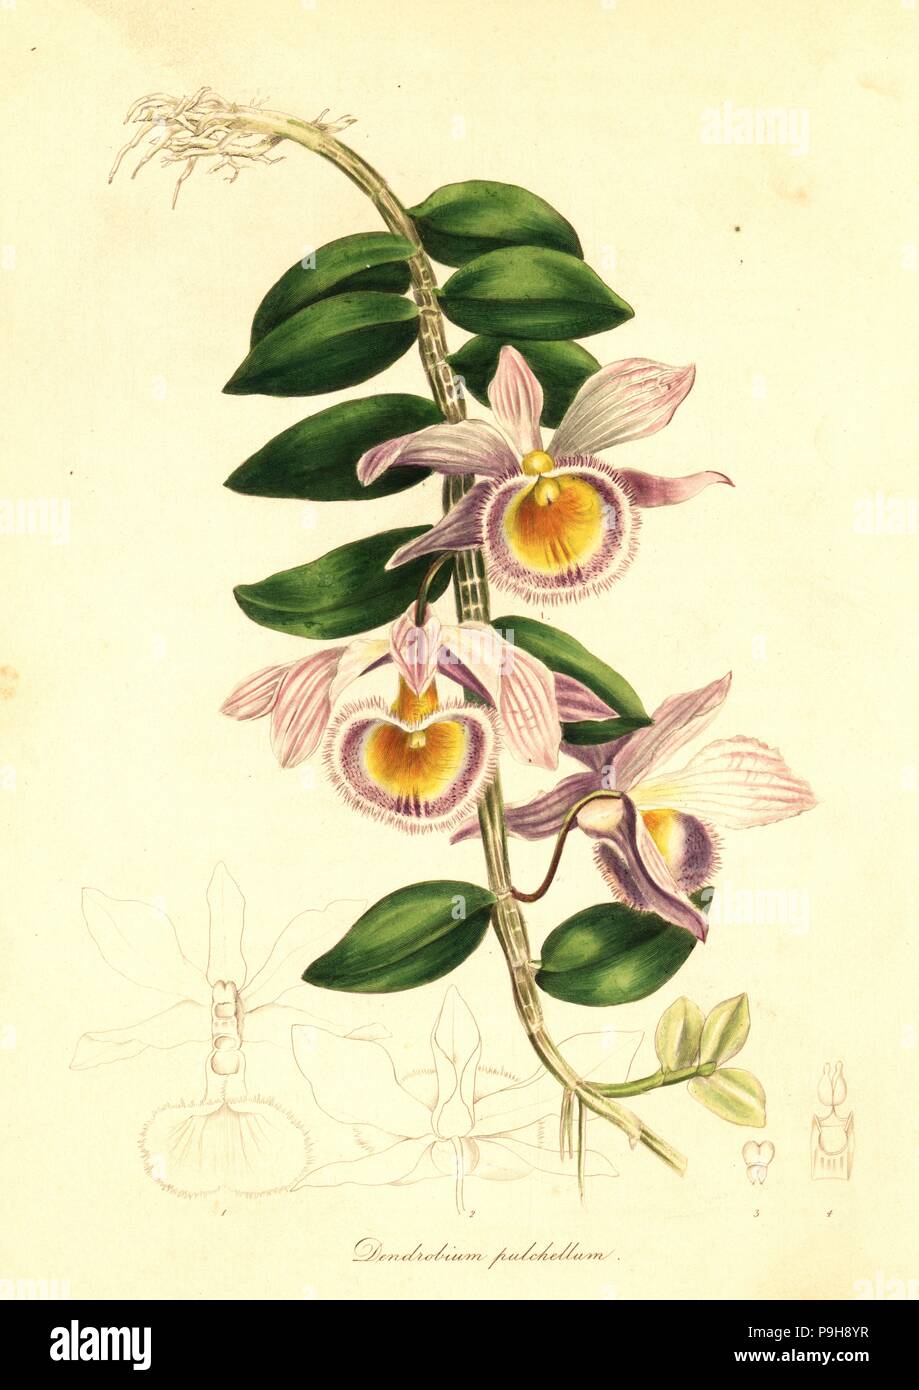 Showy dendrobium orchid, Dendrobium pulchellum. Handcoloured copperplate engraving after a botanical illustration from Benjamin Maund and the Rev. John Stevens Henslow's The Botanist, London, 1836. Stock Photo